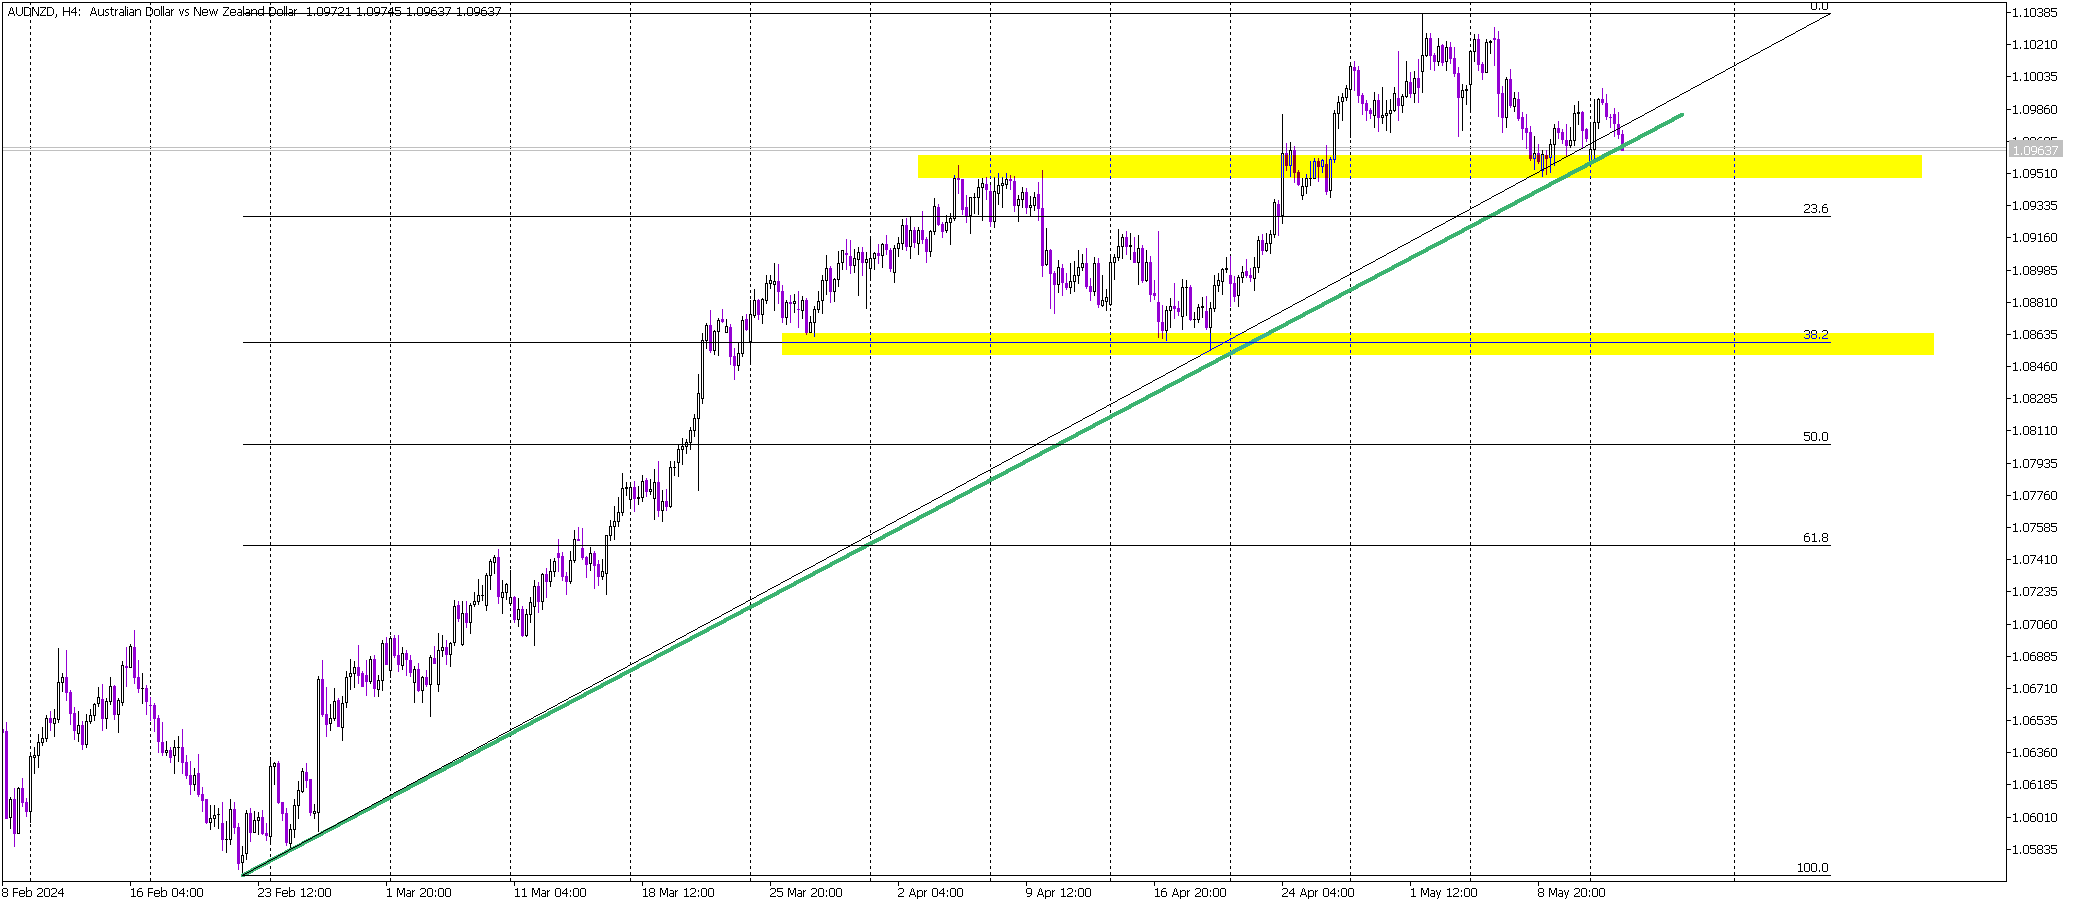 Will AUD/NZD Hold Its Ground? Upcoming Wage and Job Data Could Tell